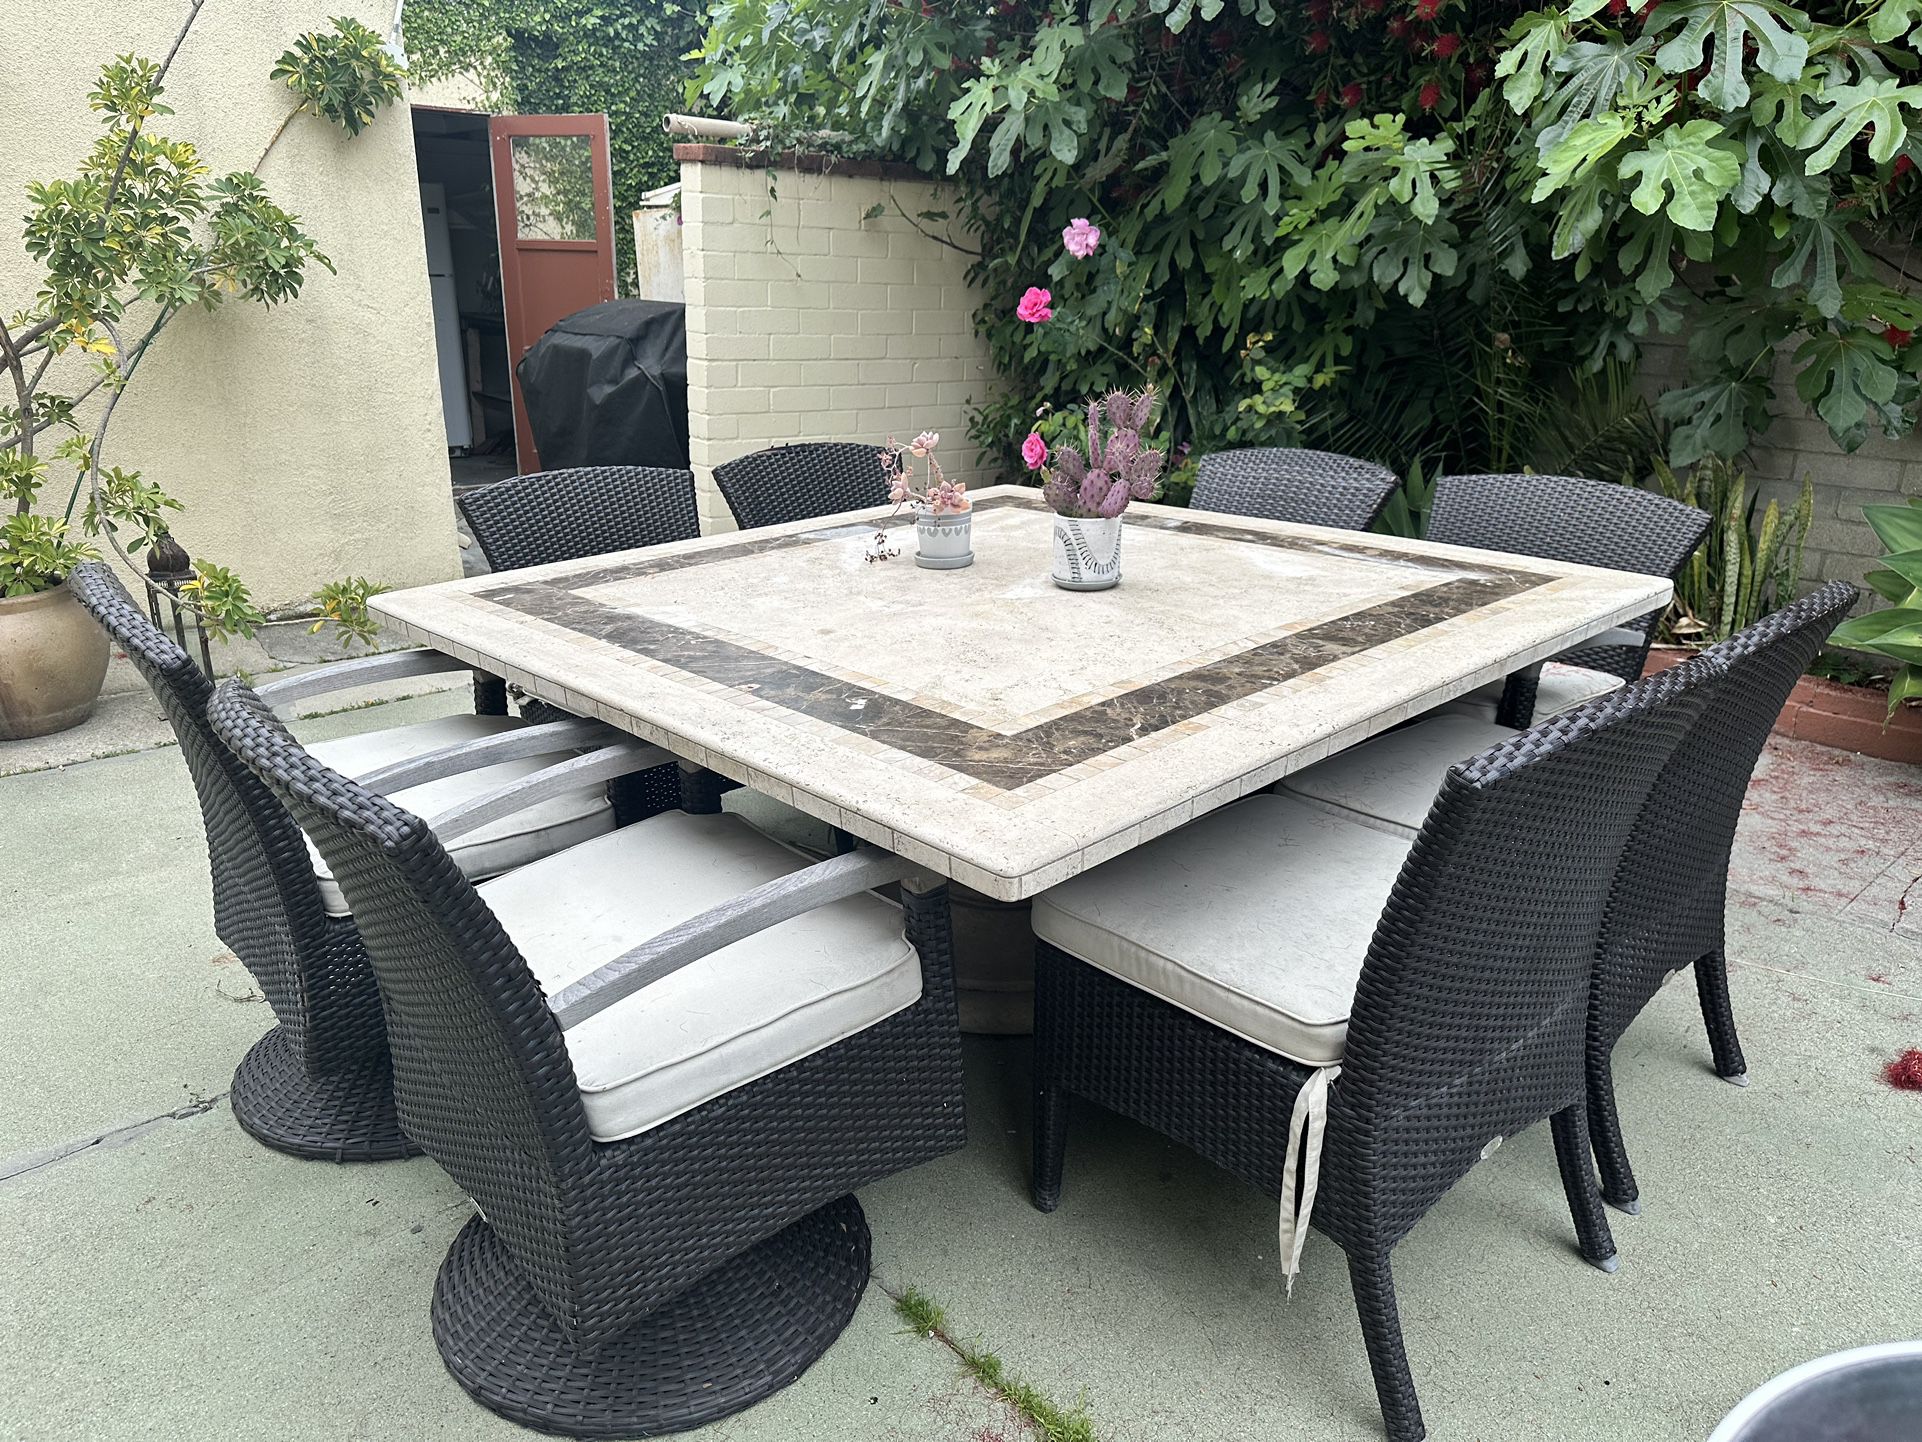 Massive marble outdoor patio dining table with 8 wicker chairs